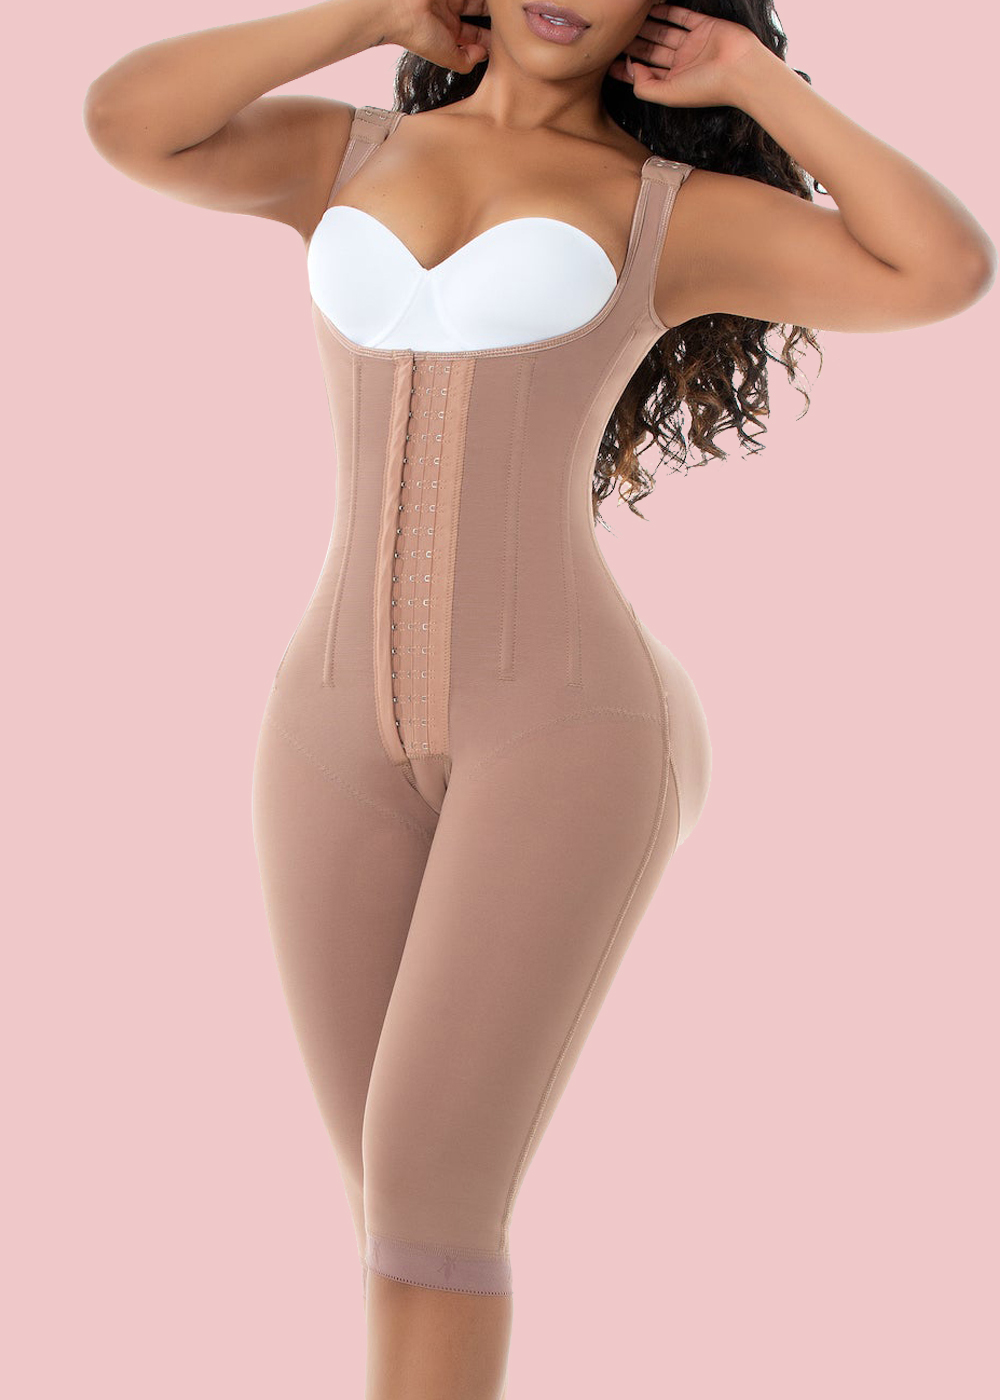 BODYSHAPER, 💃💃Get Confident By CurveShe fajas! ⚡40% OFF FOR  2ND(CODE:LV40) 👉👉Get Charming Curves!